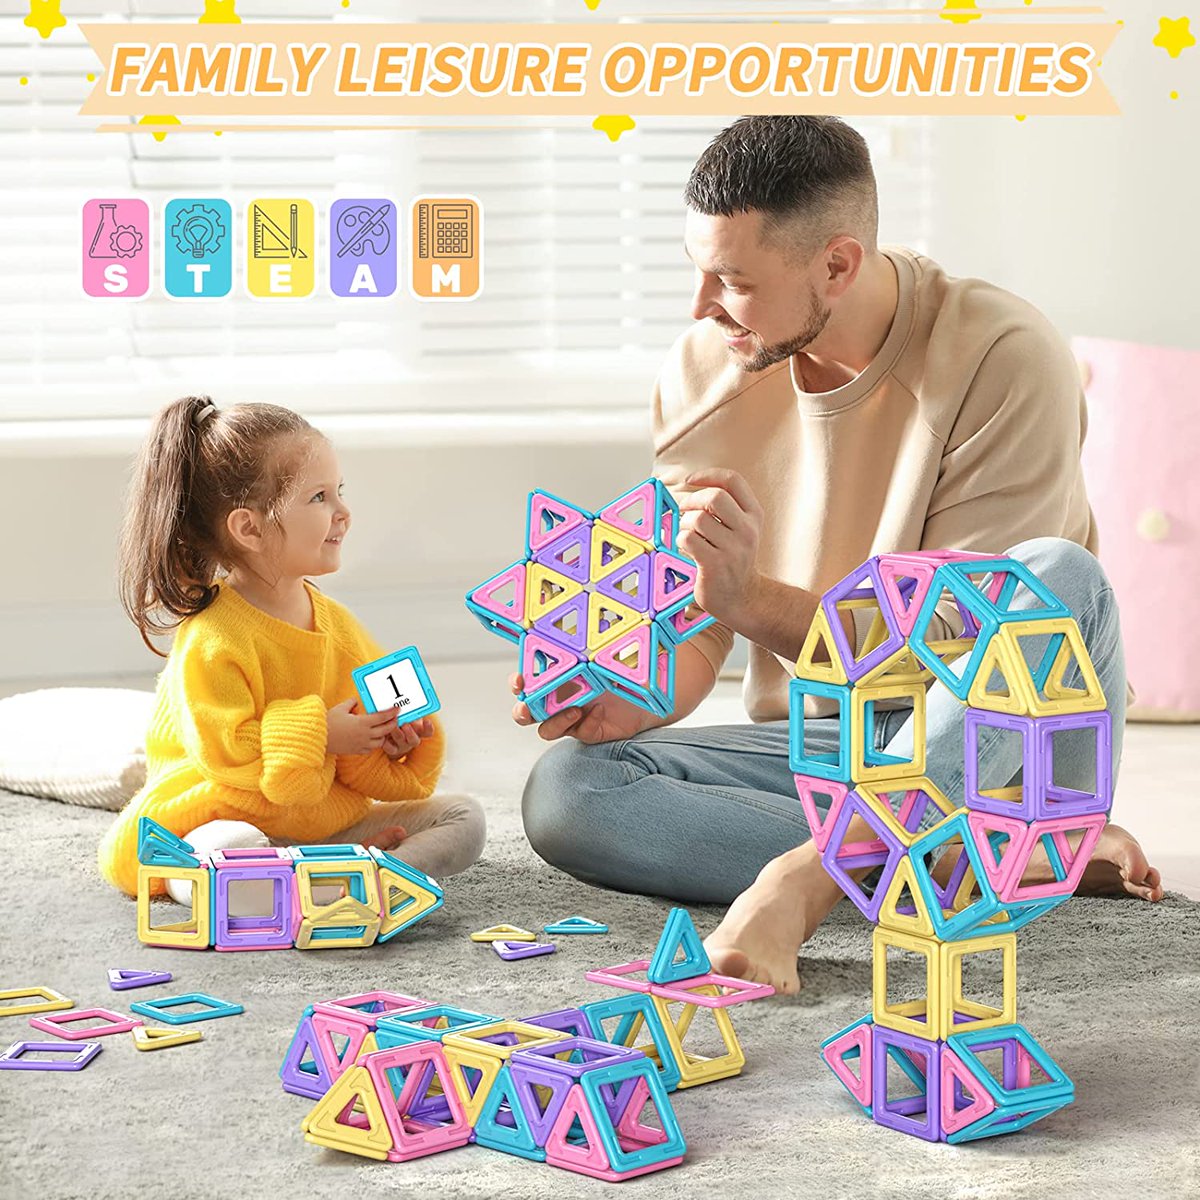 🌟 Foster Creativity with the Magnetic Blocks Basic Set! 🌟

💰 Price: $9.99 - ❌Was $19.99 - (50% off)

👉 Get this deal here: amzn.to/435menZ

#MagneticBlocks #BuildingToys #Creativity #ChildDevelopment #Discounts #GreatDeals